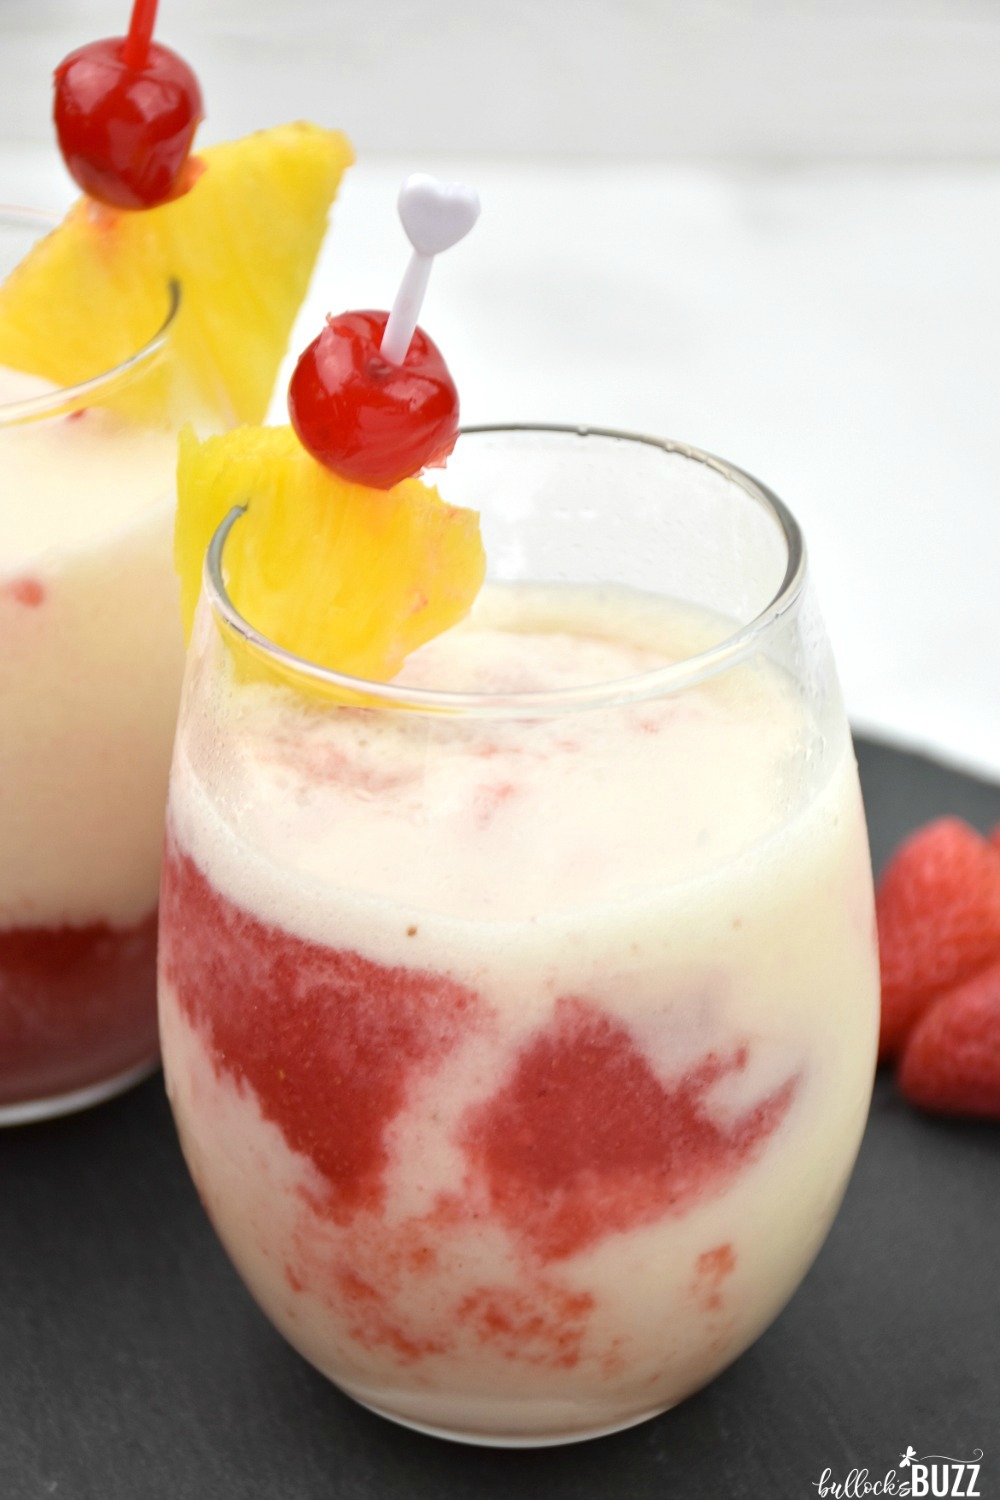 This slushy Lava Flow cocktail is absolutely delicious. The mixture of pineapple, strawberry, and coconut is a flavor combination made in heaven. Add some rum, and one sip will transport you to a tropical paradise! #cocktailrecipe #cocktail